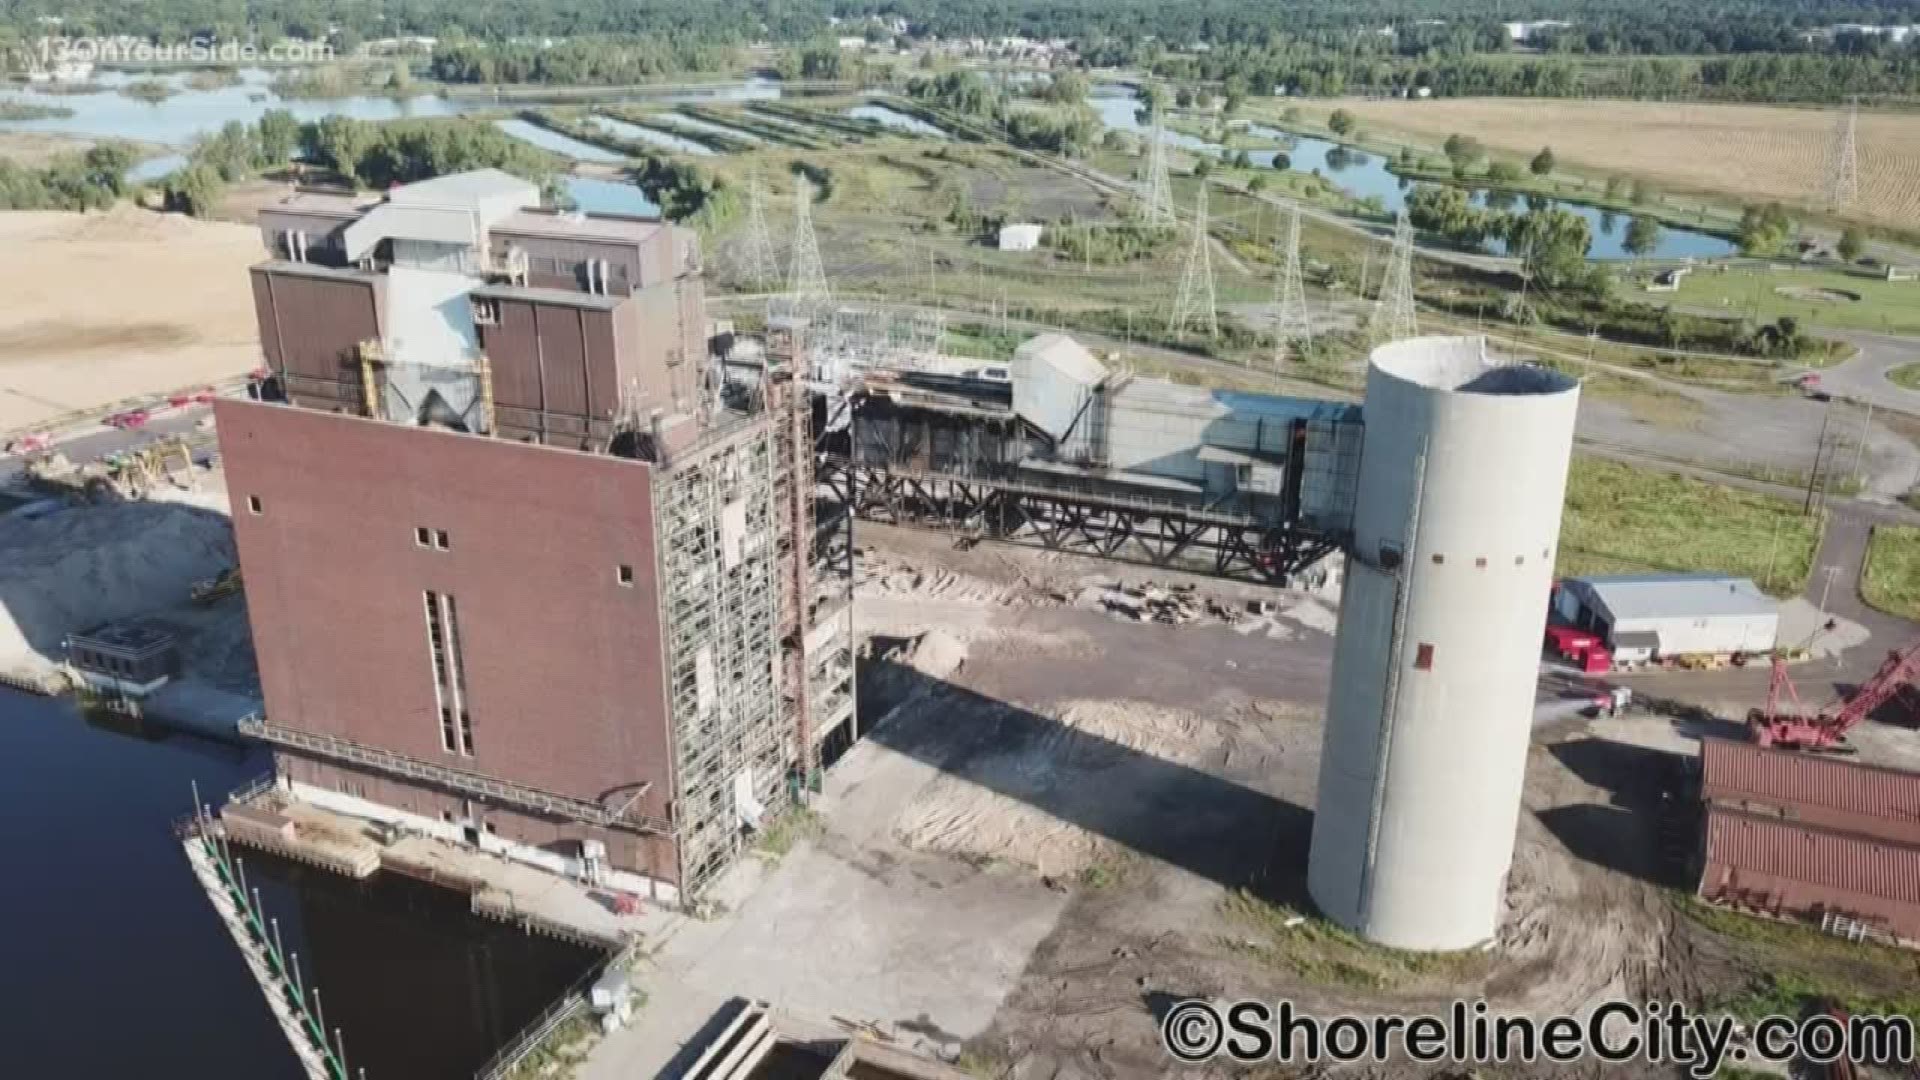 The skywalk connected the closed powerhouse to what's left of the Cobb's smokestack.